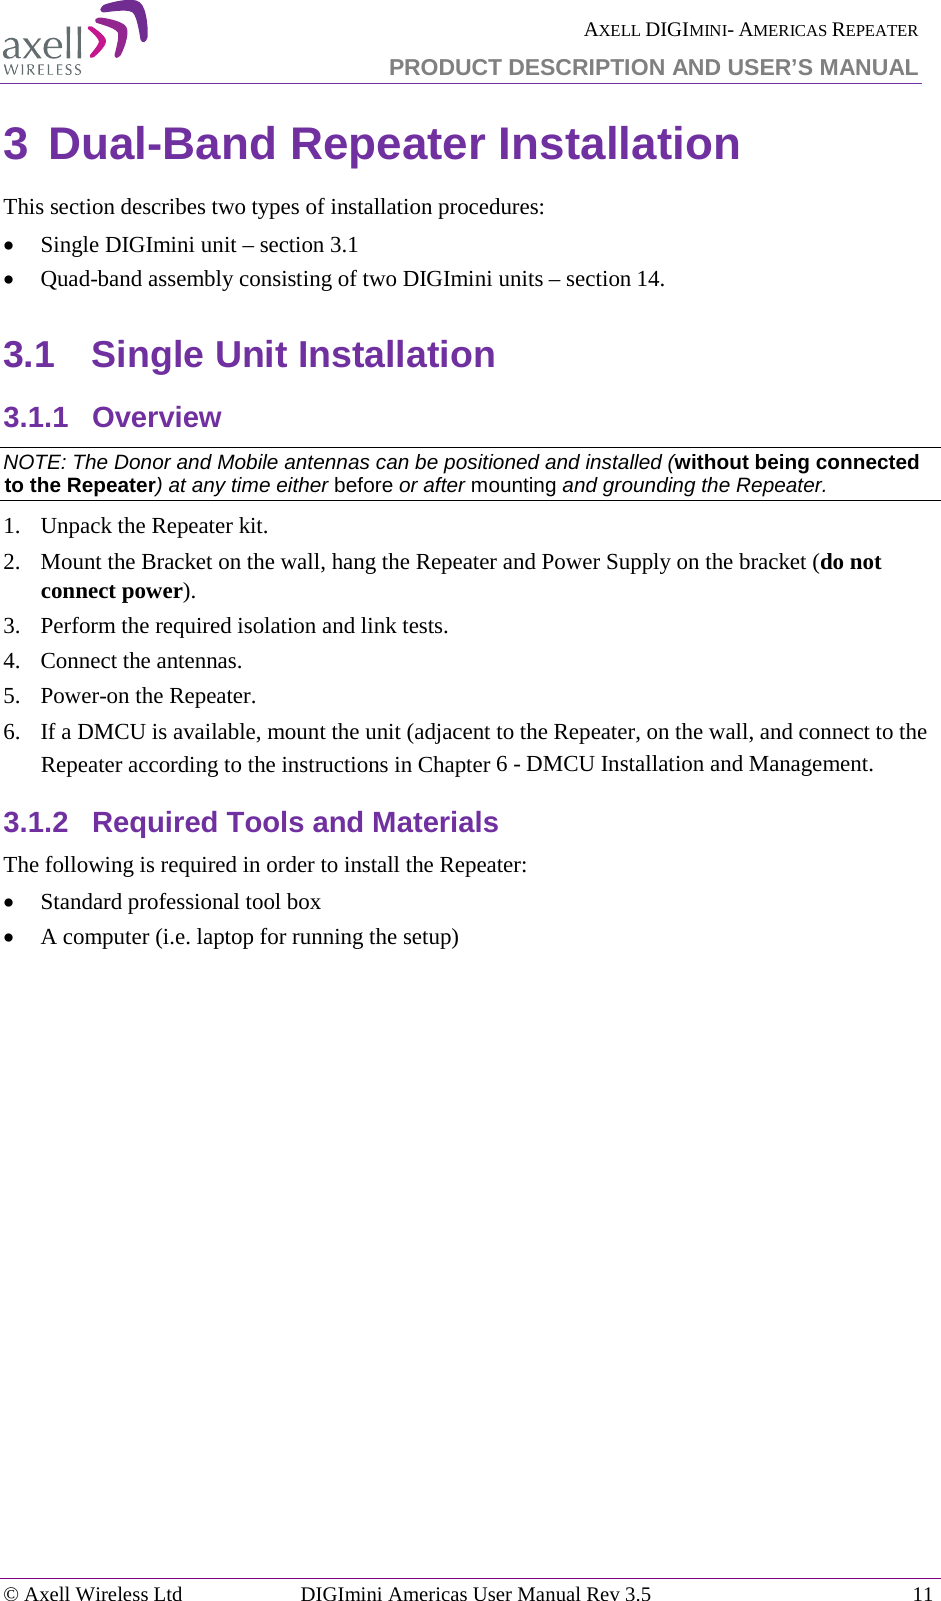  AXELL DIGIMINI- AMERICAS REPEATER PRODUCT DESCRIPTION AND USER’S MANUAL © Axell Wireless Ltd DIGImini Americas User Manual Rev 3.5  11  3 Dual-Band Repeater Installation This section describes two types of installation procedures: • Single DIGImini unit – section  3.1 • Quad-band assembly consisting of two DIGImini units – section  1 4. 3.1  Single Unit Installation 3.1.1  Overview NOTE: The Donor and Mobile antennas can be positioned and installed (without being connected to the Repeater) at any time either before or after mounting and grounding the Repeater. 1.  Unpack the Repeater kit. 2.  Mount the Bracket on the wall, hang the Repeater and Power Supply on the bracket (do not connect power).  3.  Perform the required isolation and link tests. 4.  Connect the antennas.  5.  Power-on the Repeater. 6.  If a DMCU is available, mount the unit (adjacent to the Repeater, on the wall, and connect to the Repeater according to the instructions in Chapter  6 - DMCU Installation and Management. 3.1.2  Required Tools and Materials The following is required in order to install the Repeater: • Standard professional tool box • A computer (i.e. laptop for running the setup)   